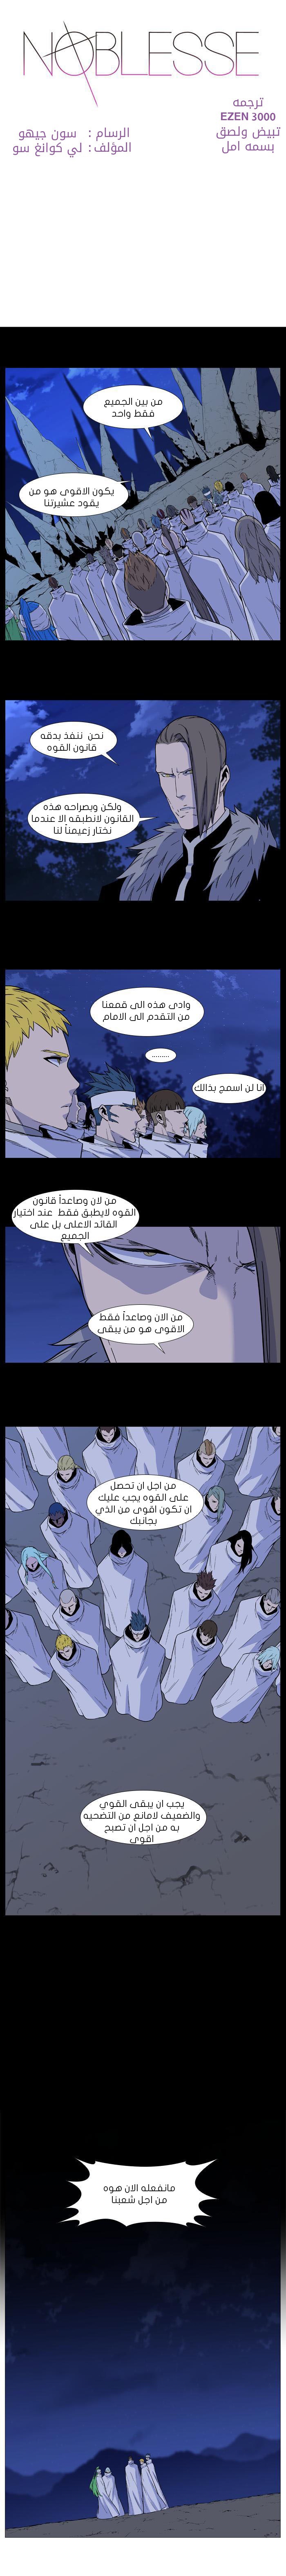 Noblesse: Chapter 493 - Page 1